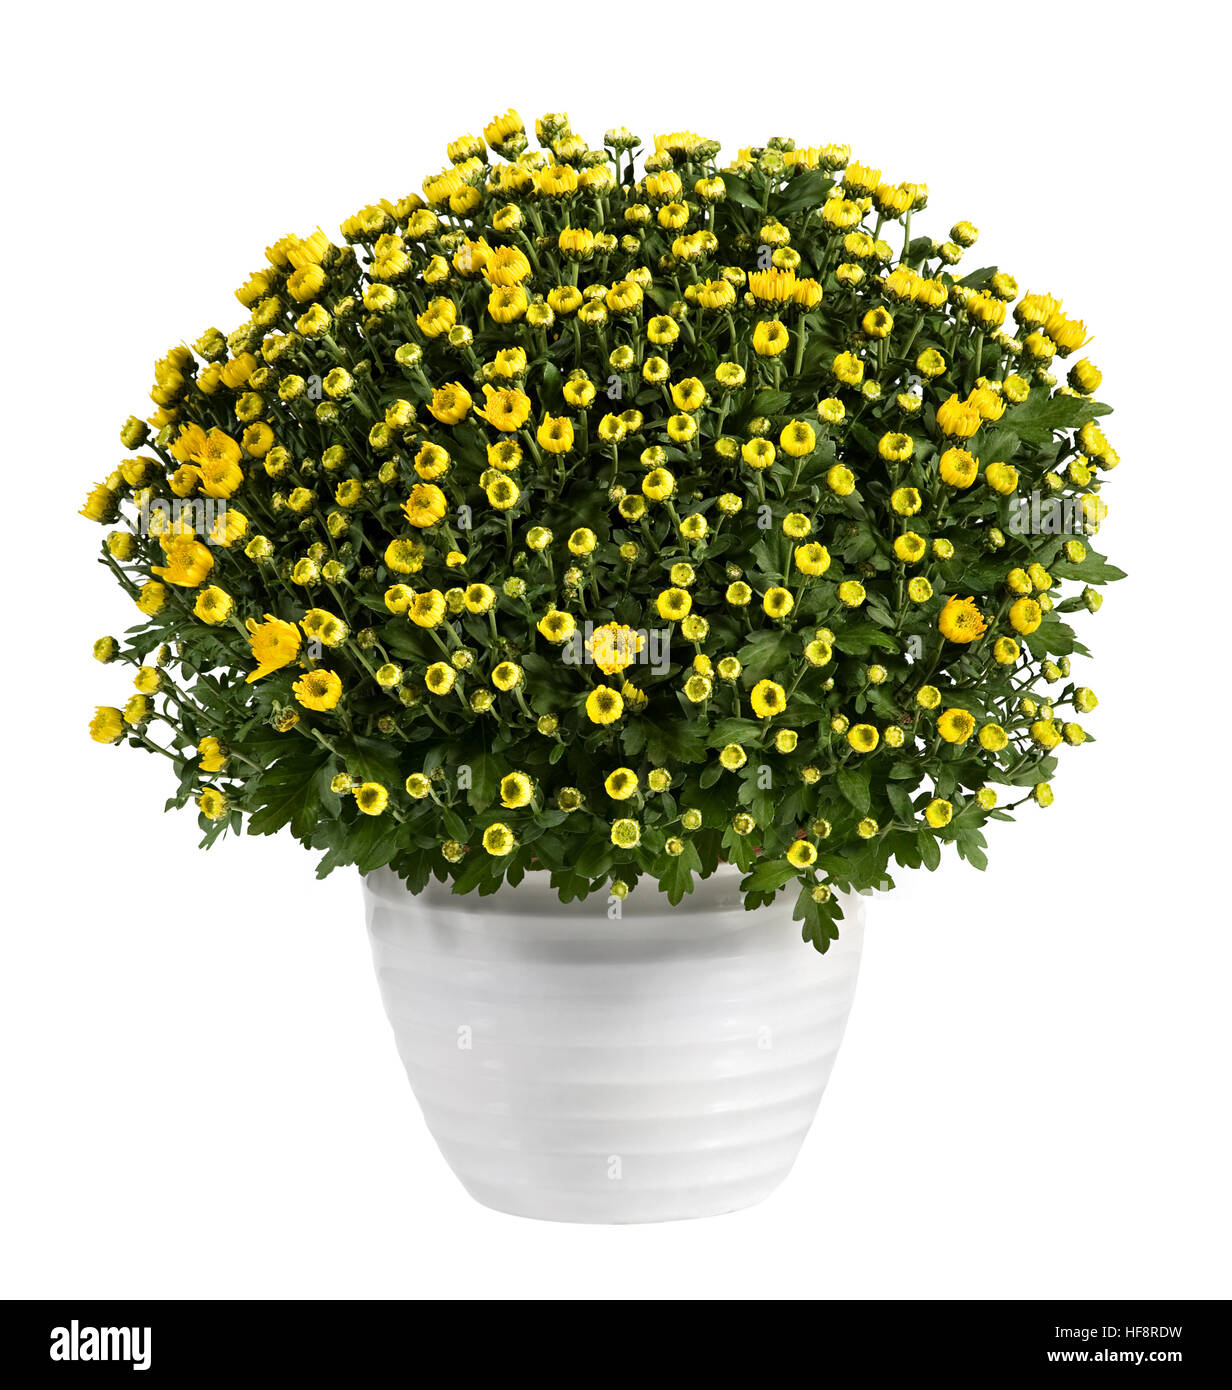 Pot of yellow flowering chrysanthemums for indoor decoration Stock Photo